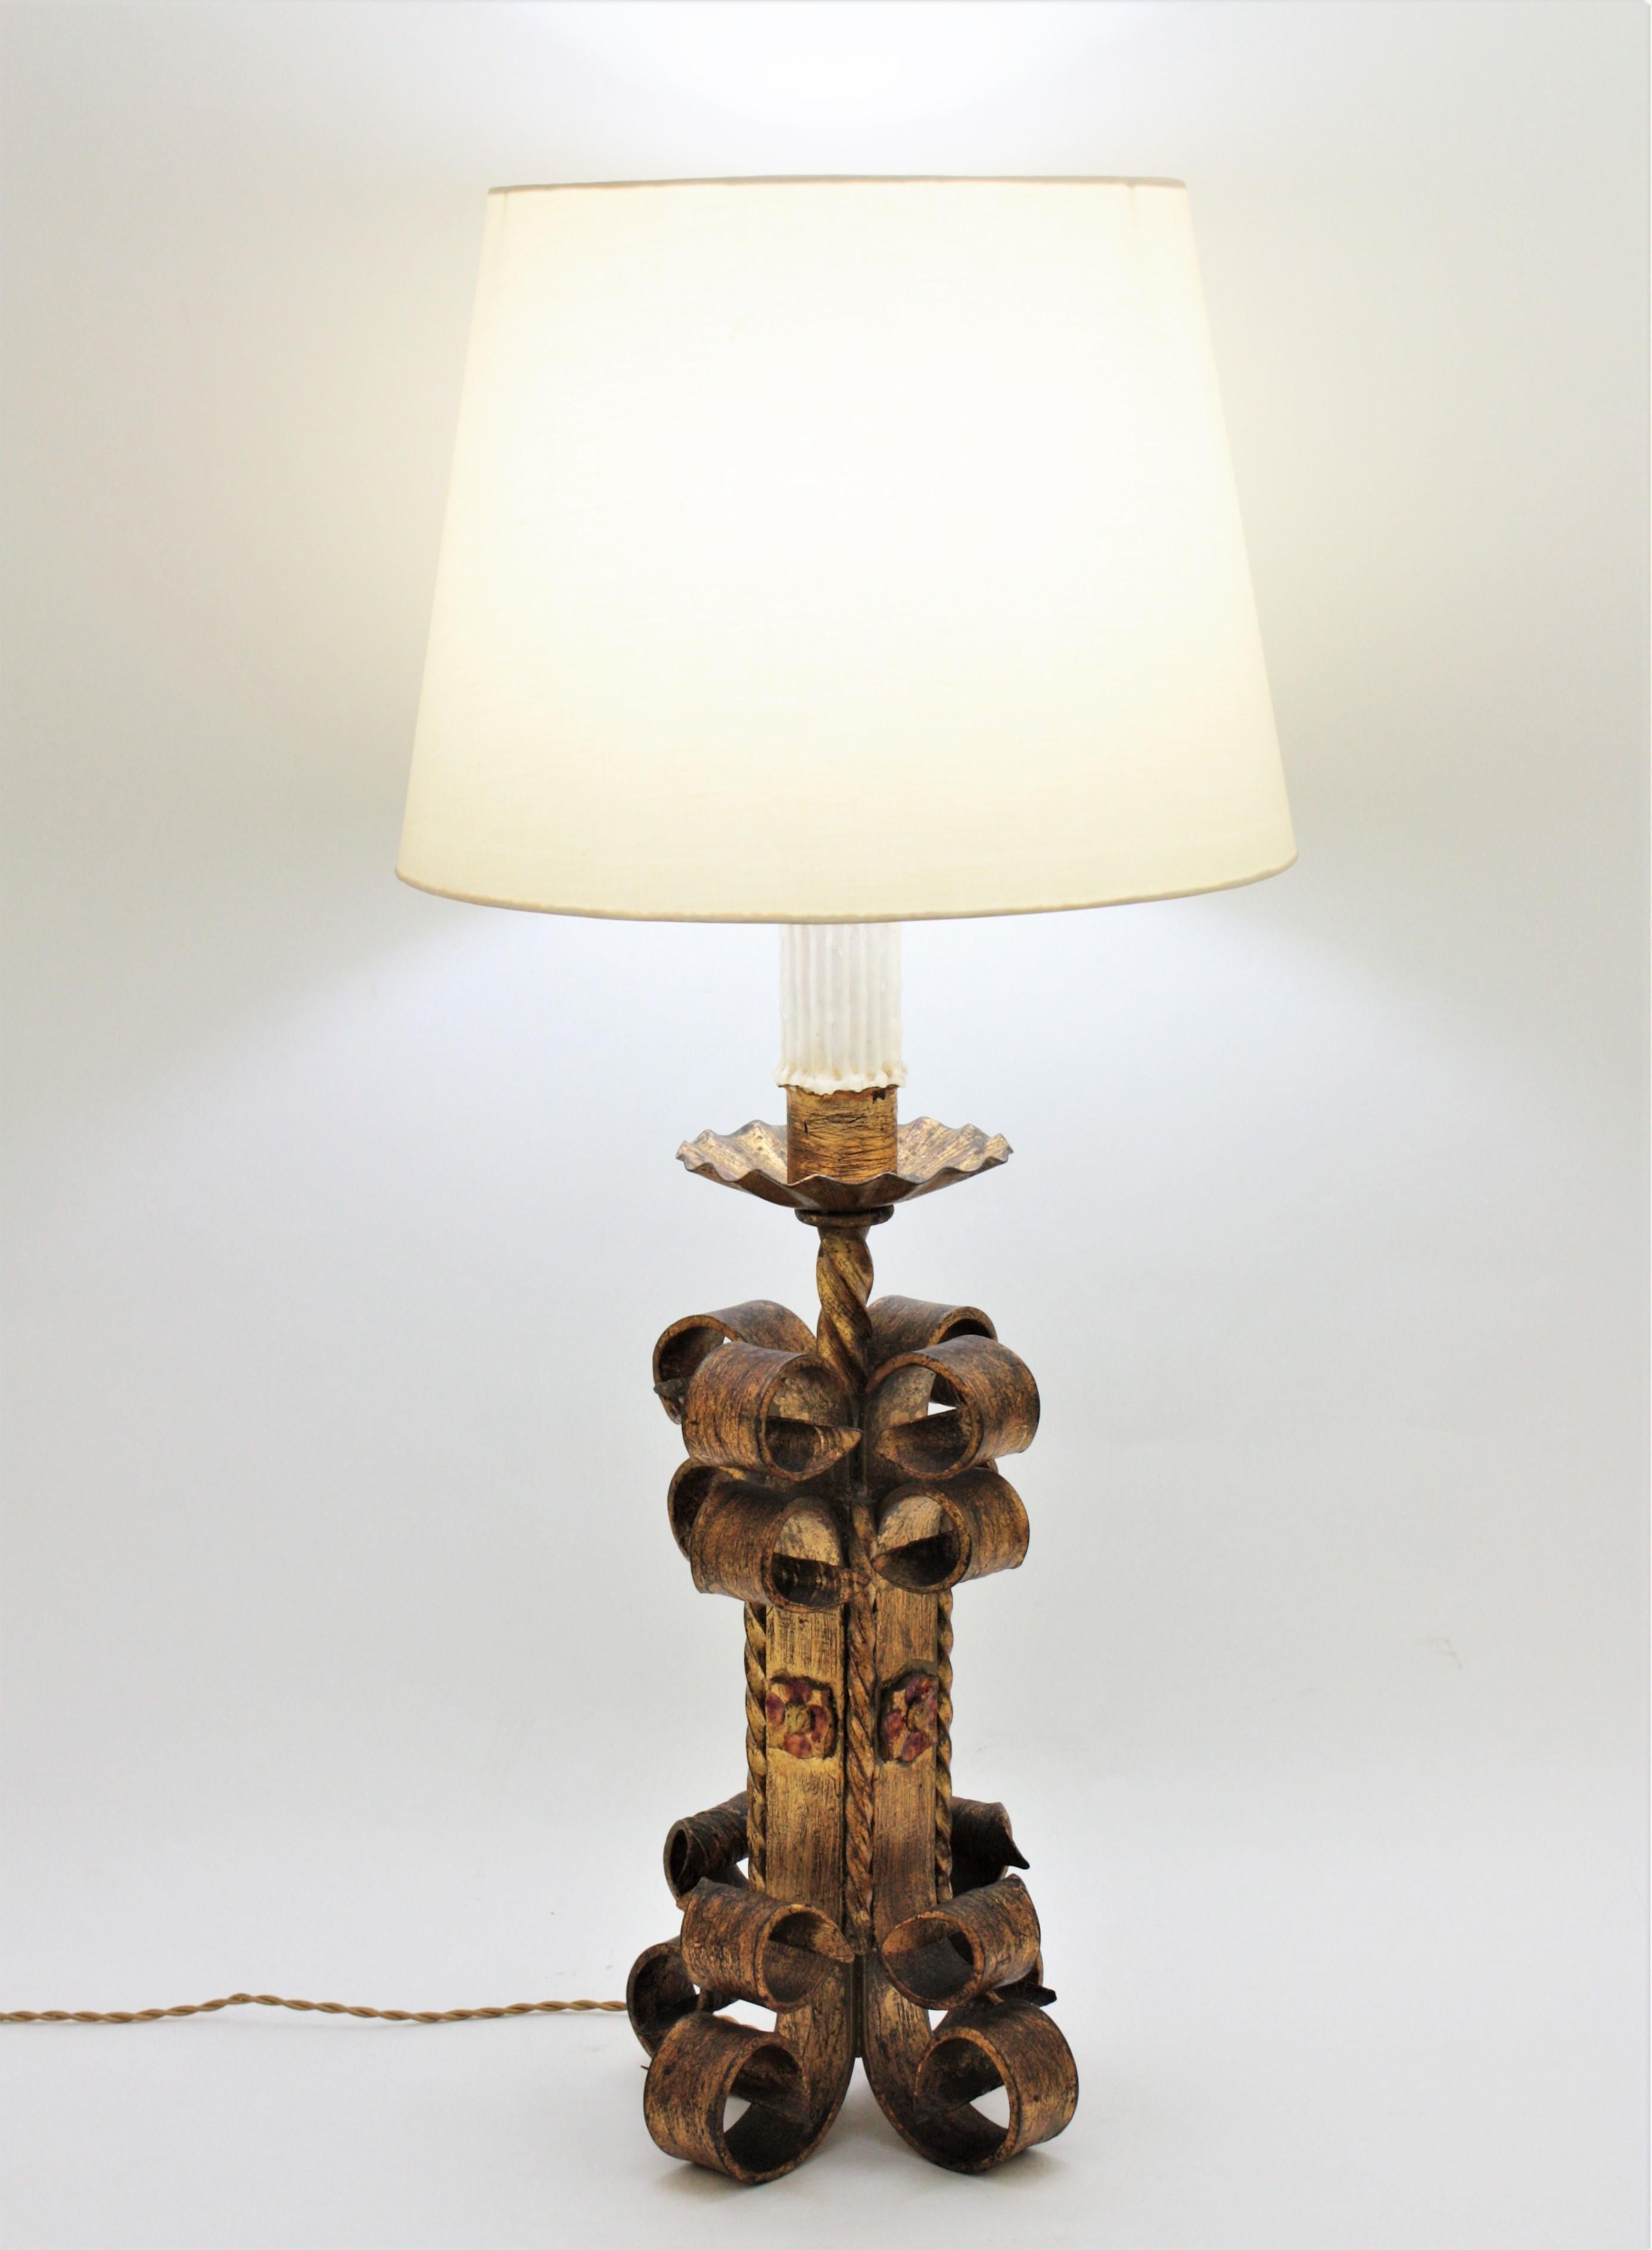 Spanish Revival Scrollwork Table Lamp in Gilt Wrought Iron, 1940s For Sale 5